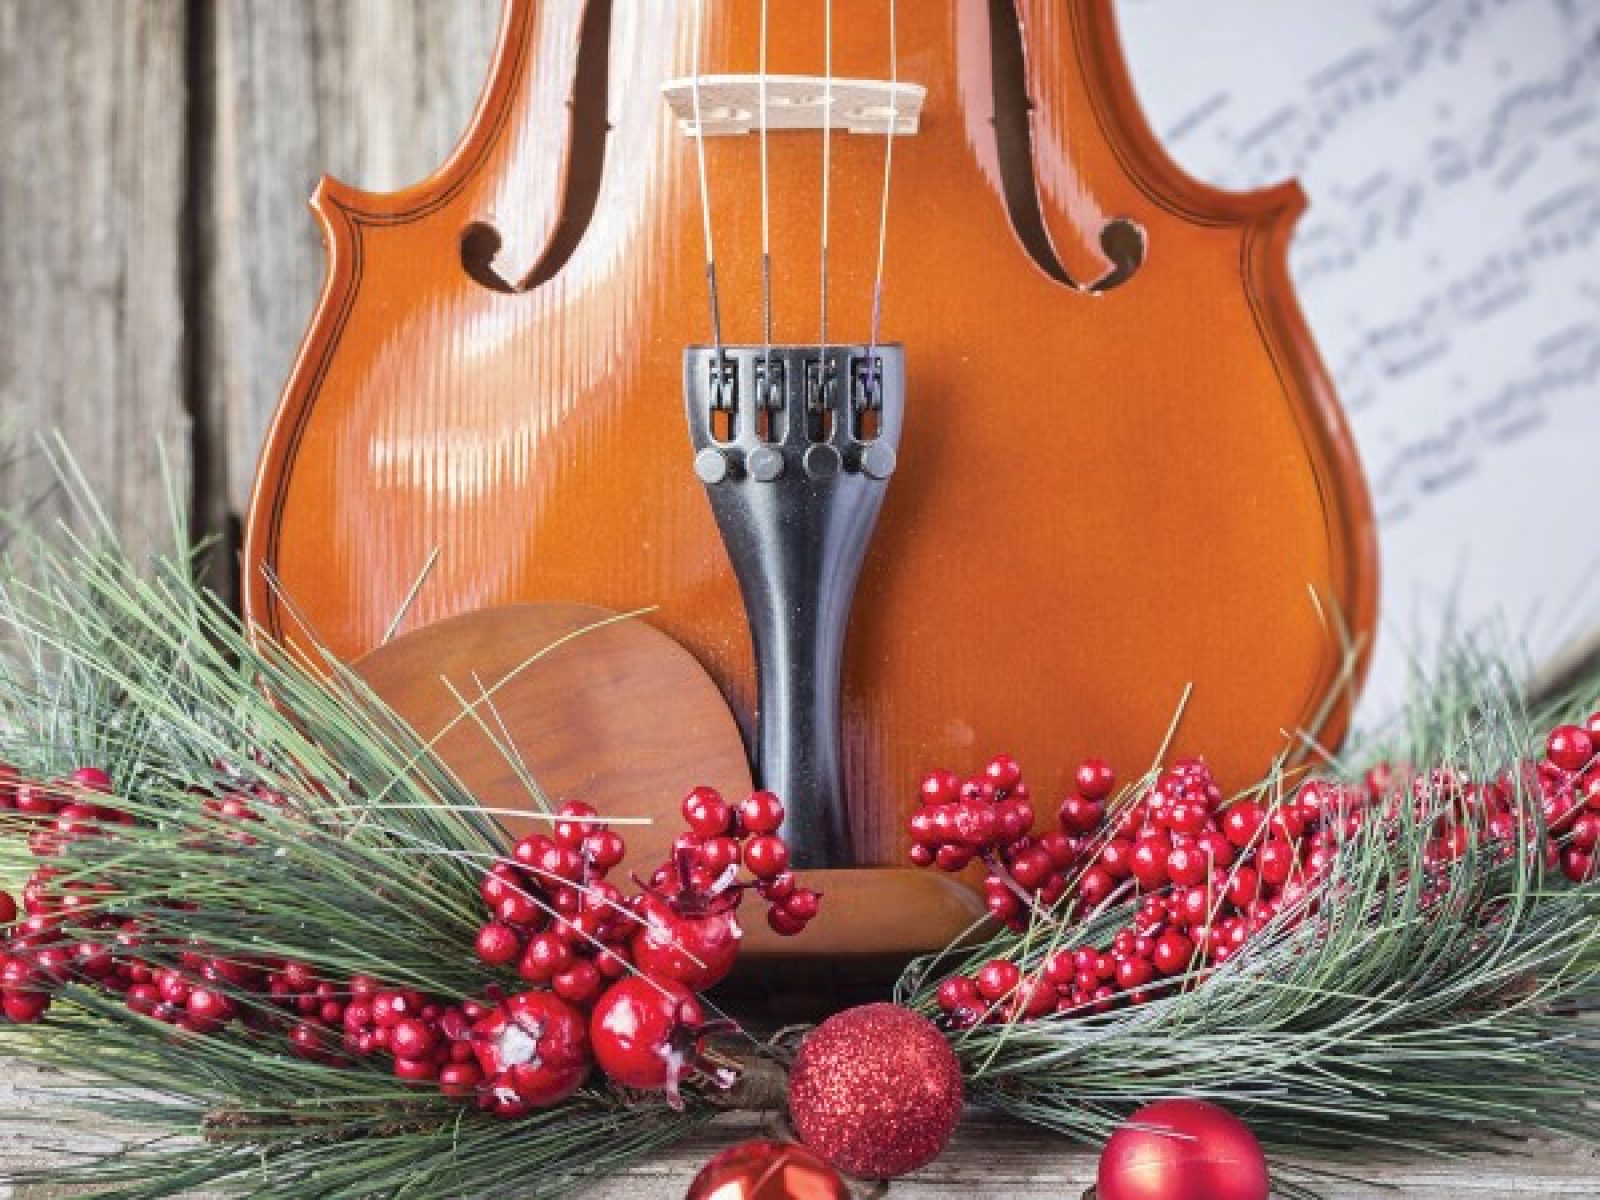 Violin in front of sheet music with pine, red berries, and red ornaments